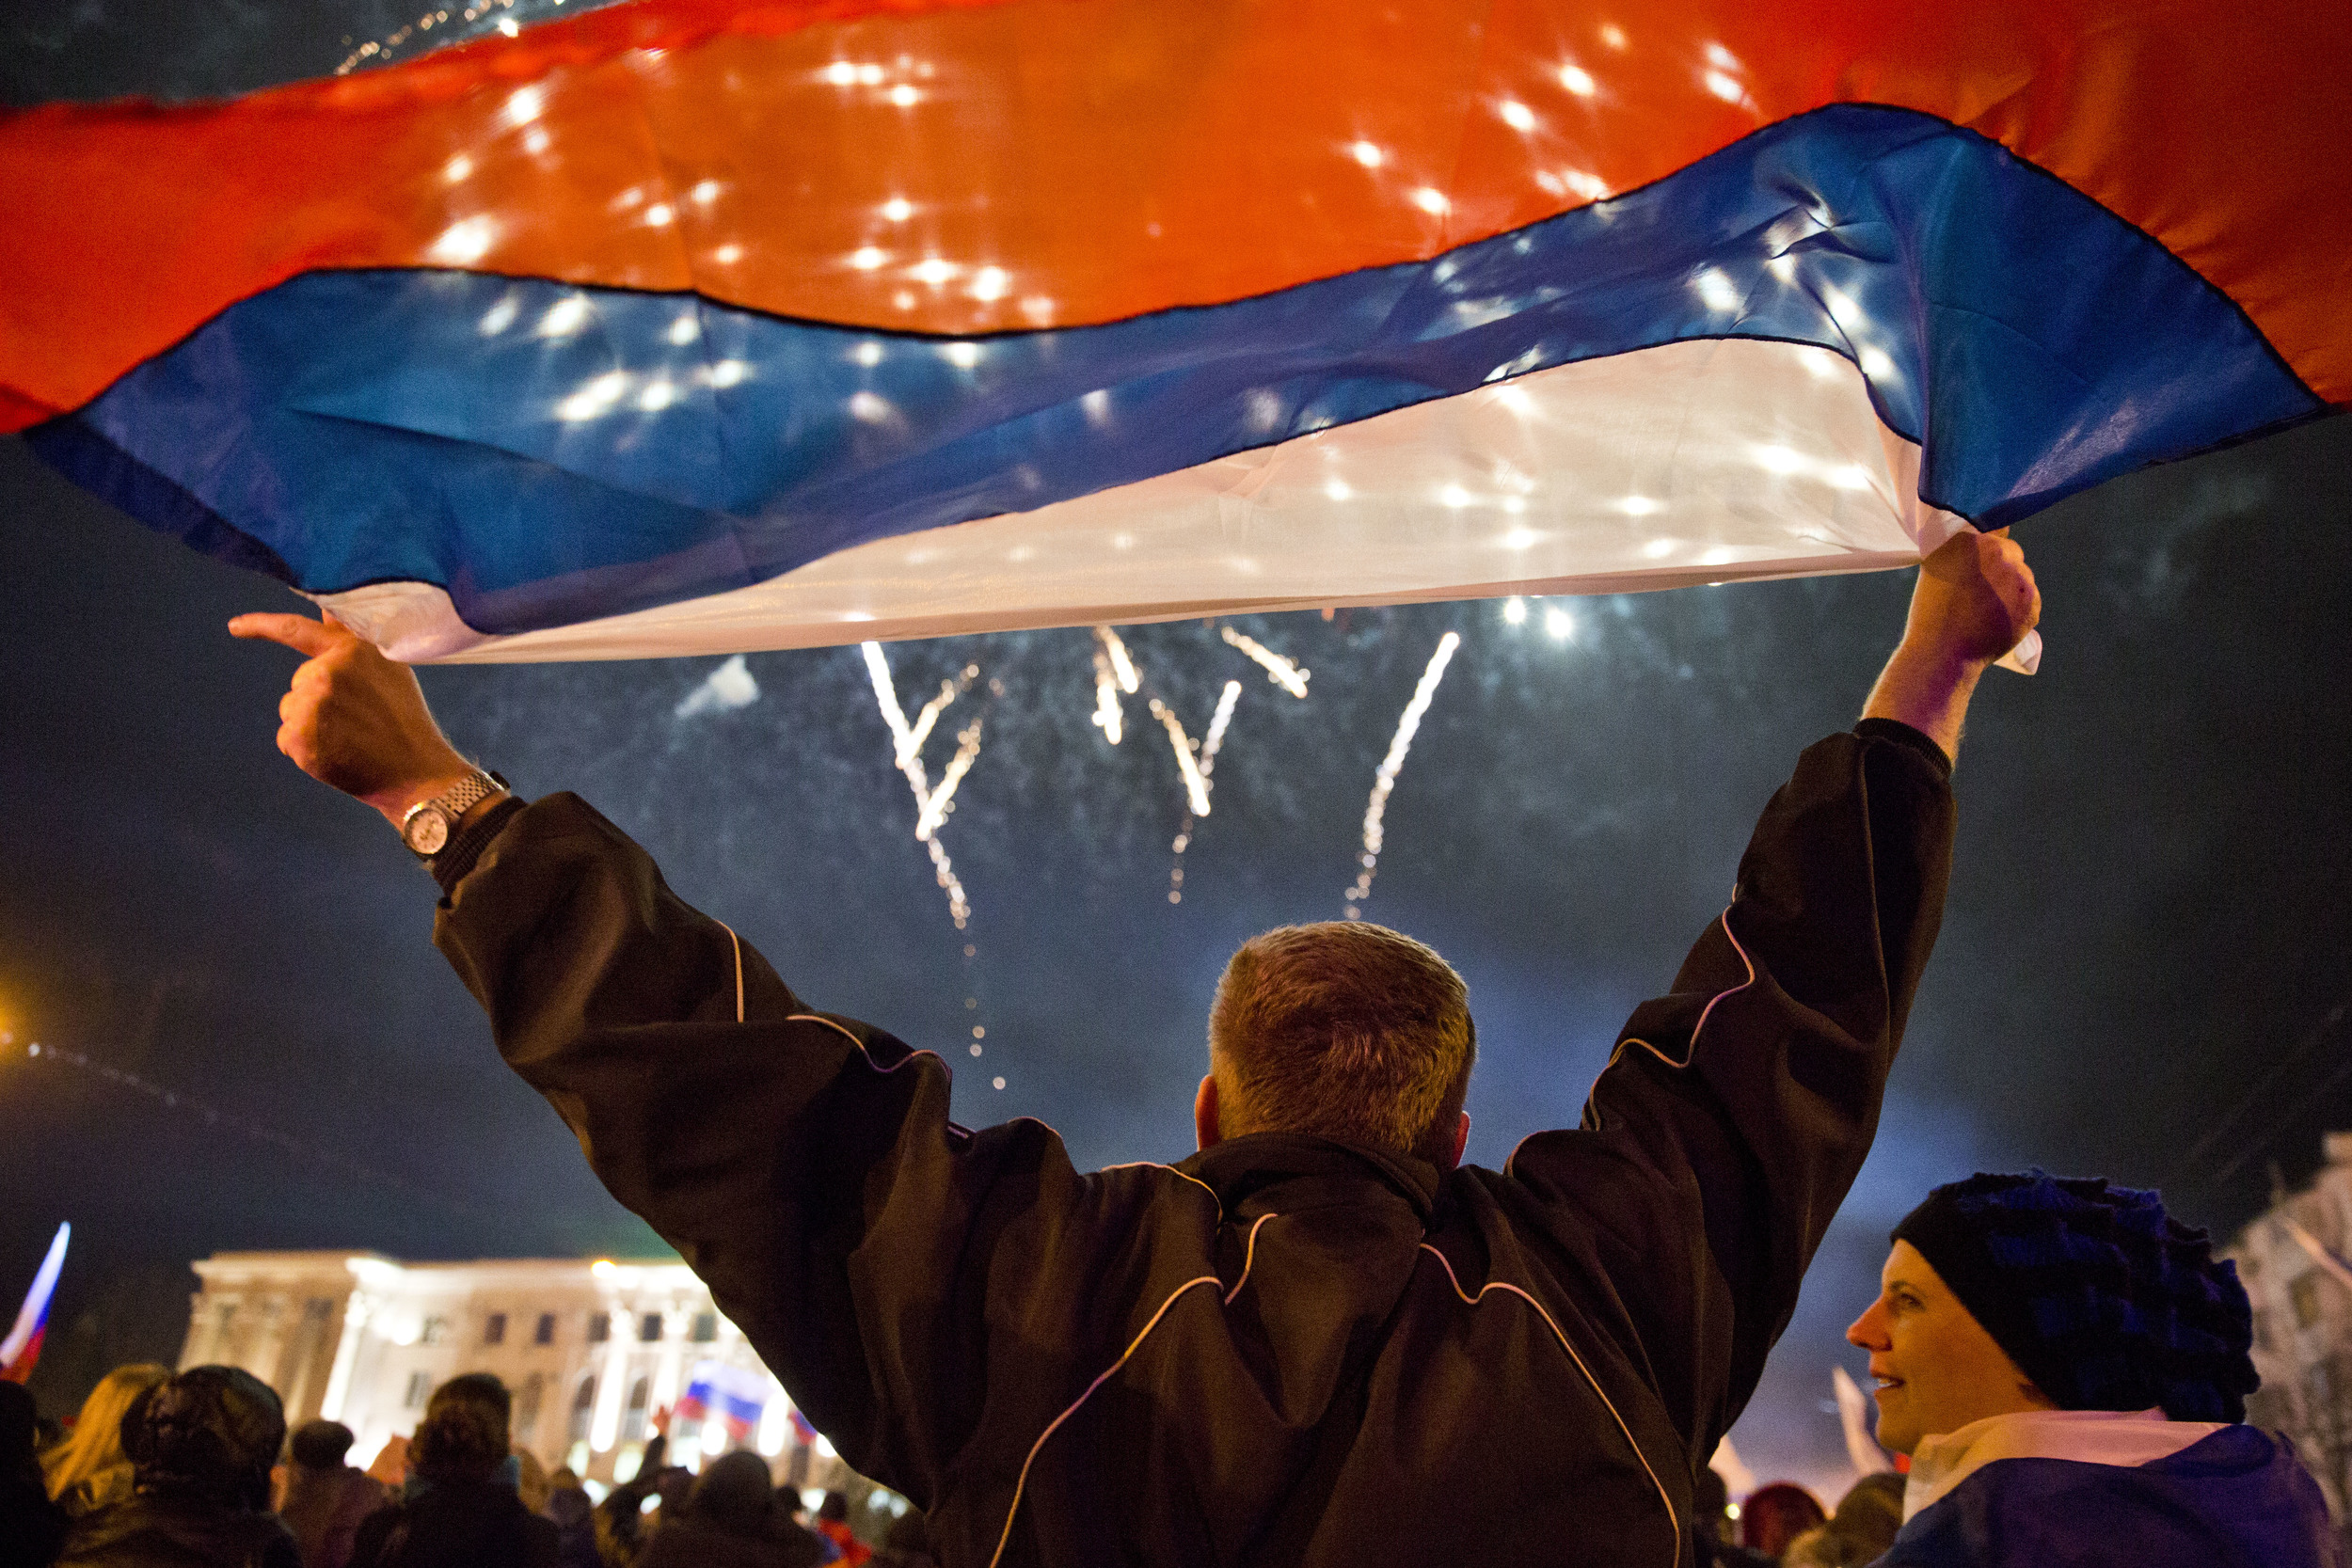  A man is seen holding Russian flag as Simferopol celebrates Crimea becoming a part of Russia 